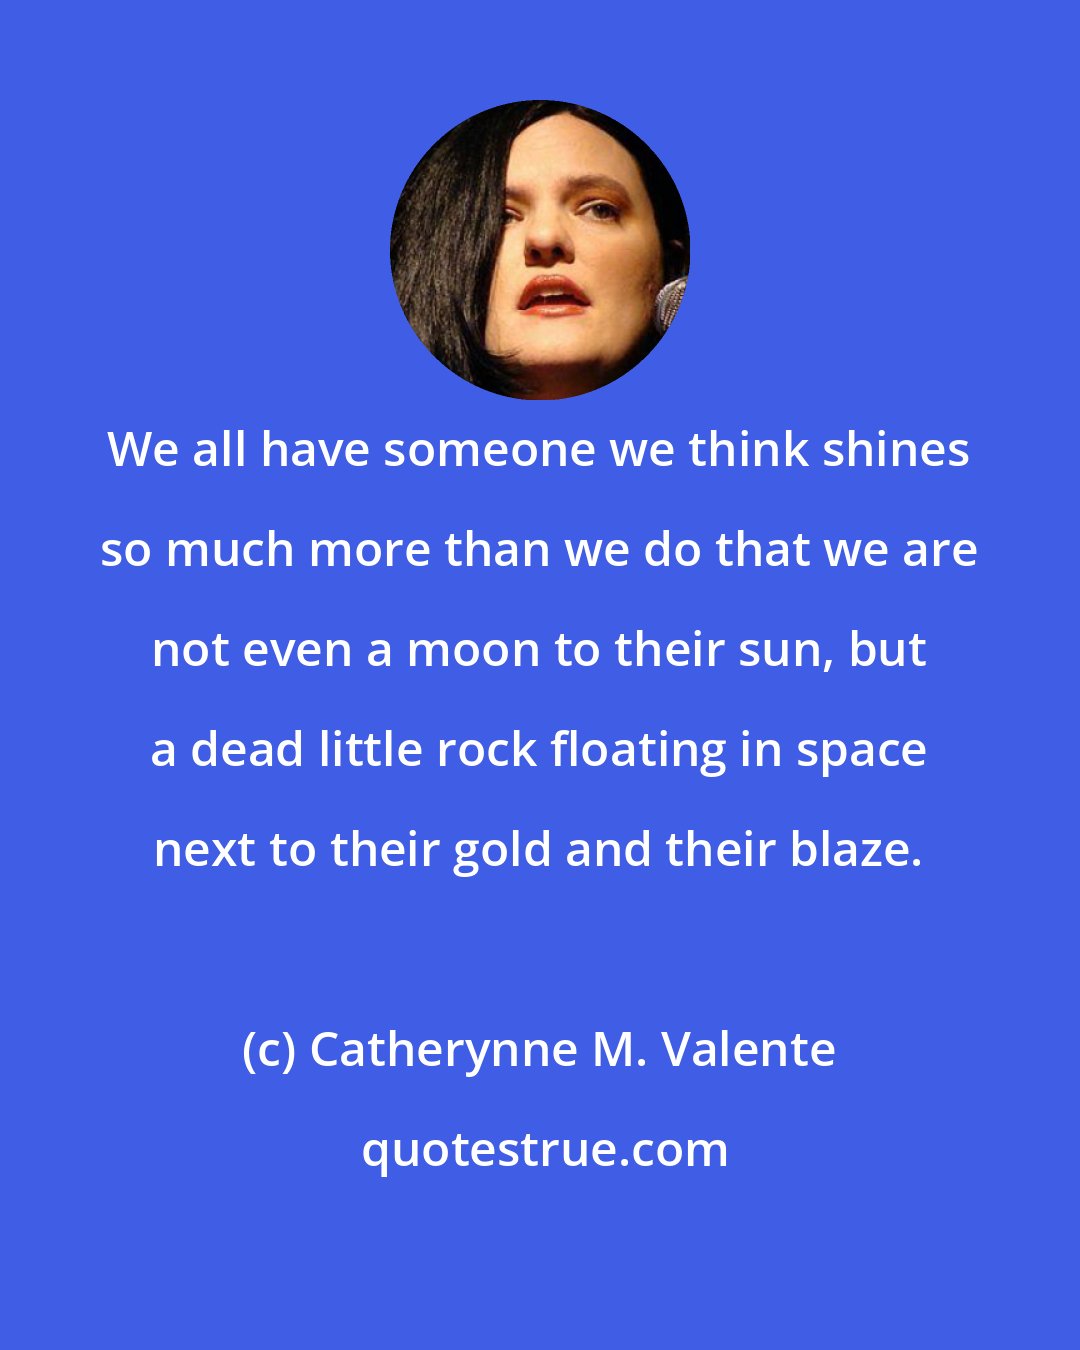 Catherynne M. Valente: We all have someone we think shines so much more than we do that we are not even a moon to their sun, but a dead little rock floating in space next to their gold and their blaze.